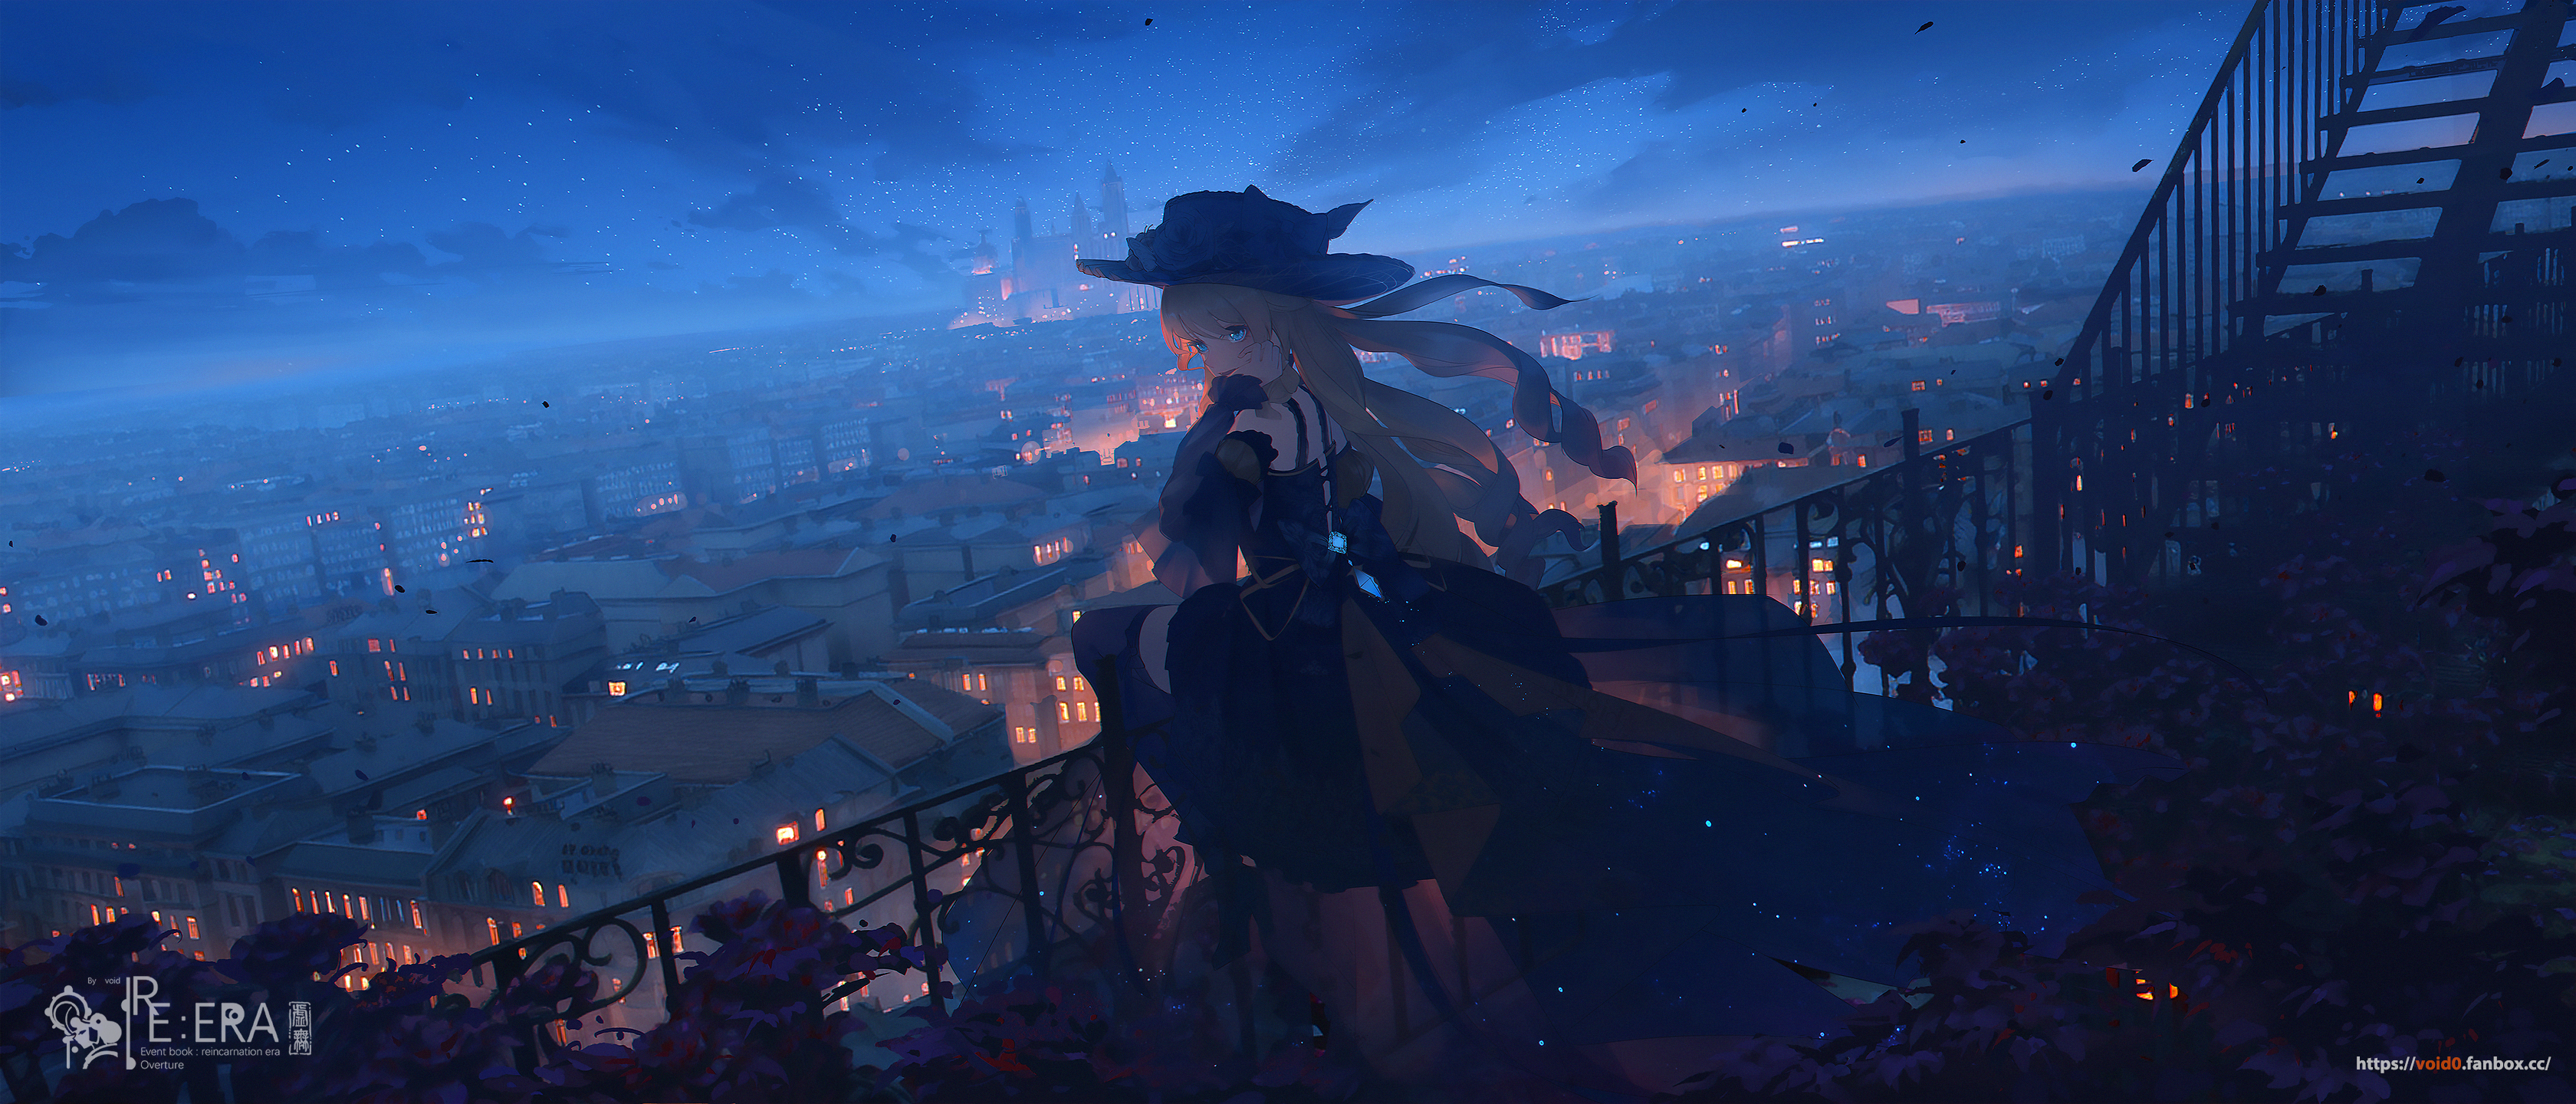 Anime 3360x1440 Genshin Impact artwork Navia (Genshin Impact) anime anime girls blonde blue eyes city horizon hat dress long hair stairs fence flowers starred sky void_0 watermarked cityscape looking at viewer standing handrail building detached sleeves stars